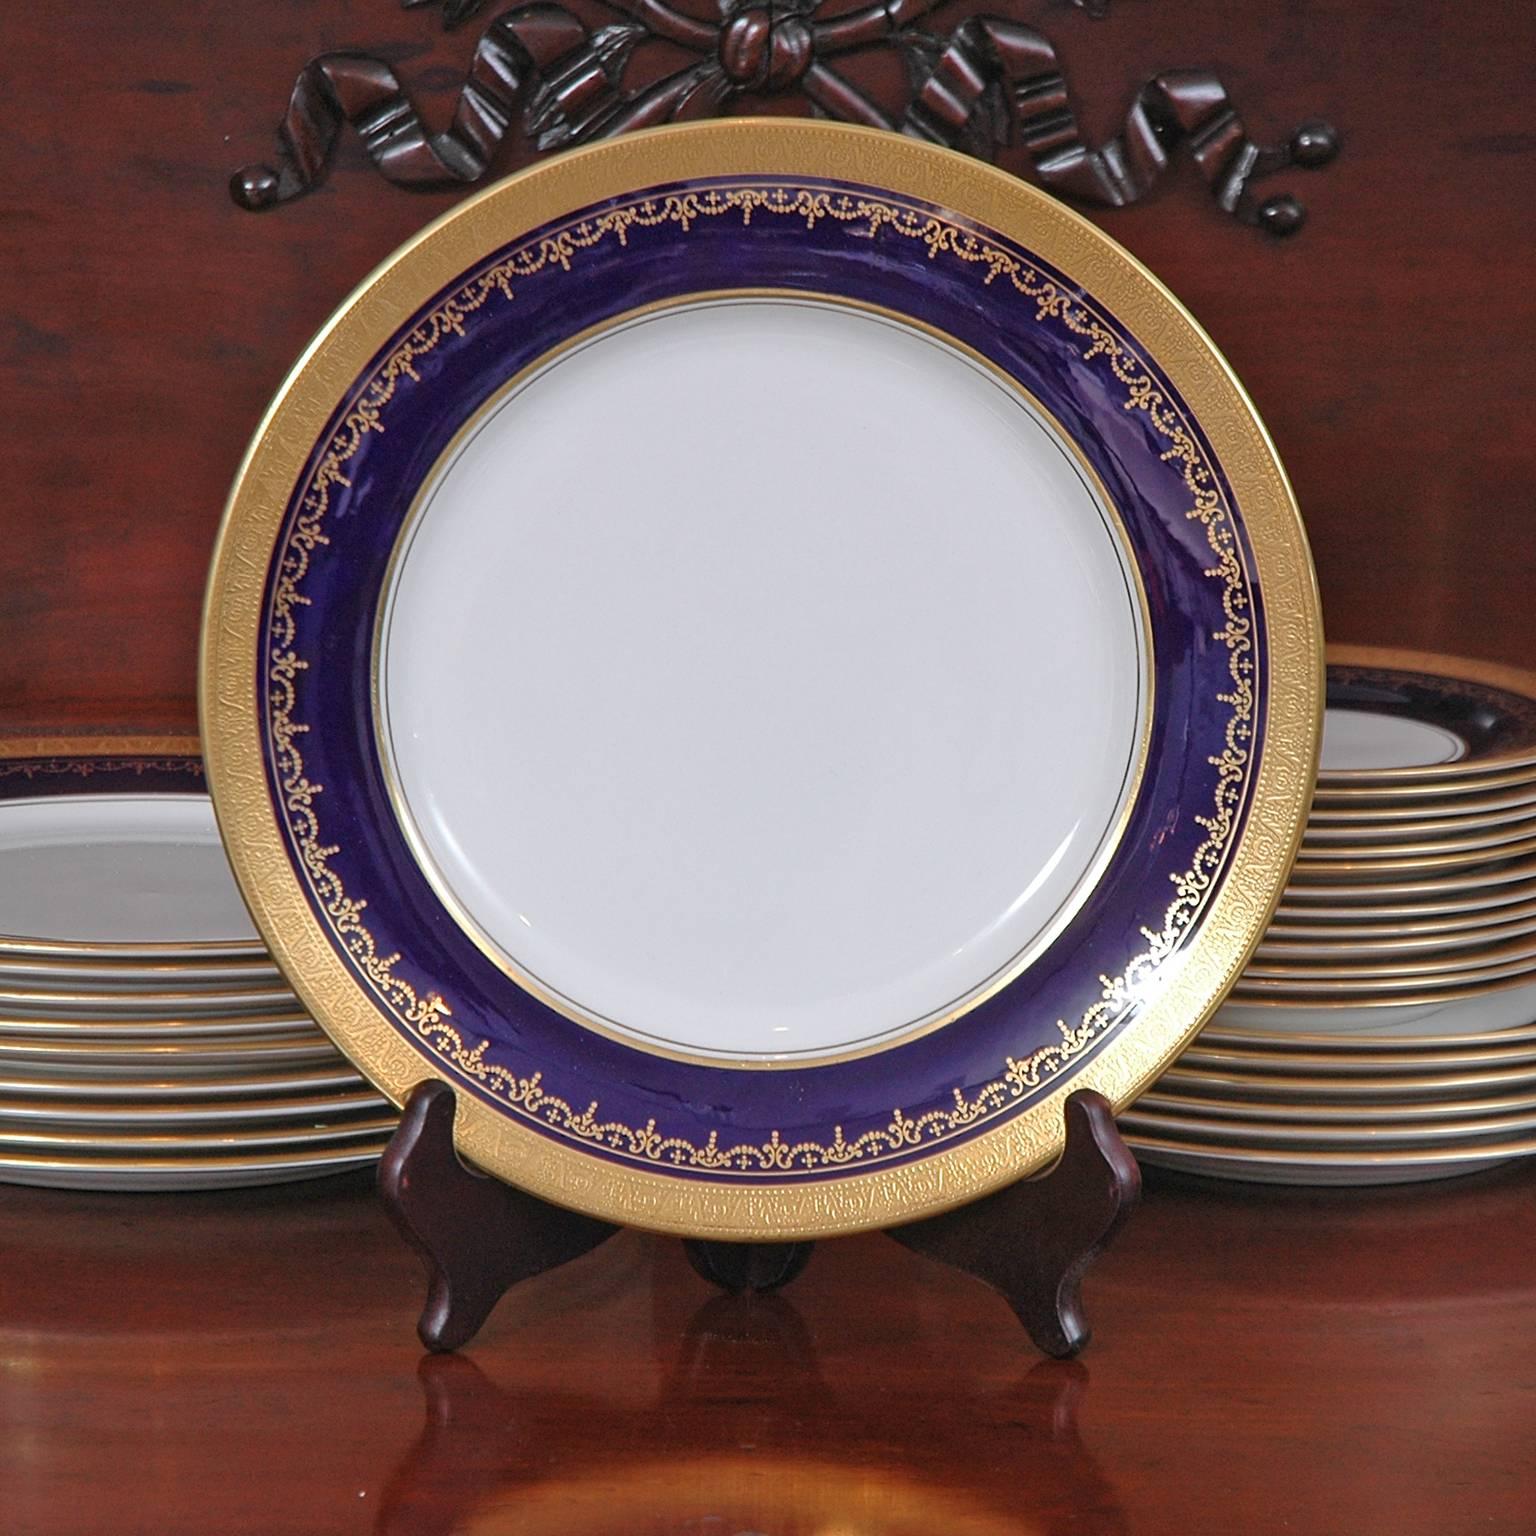 Ansley China, Georgian Cobalt pattern with cobalt blue band & gold encrusted band. Includes 112 pieces: 16 dinner plates, 16 salad plates, 16 bread & butter plates, 16 cream soup bowls & plates, 16 footed tea cups & saucers.
Note: This beautiful